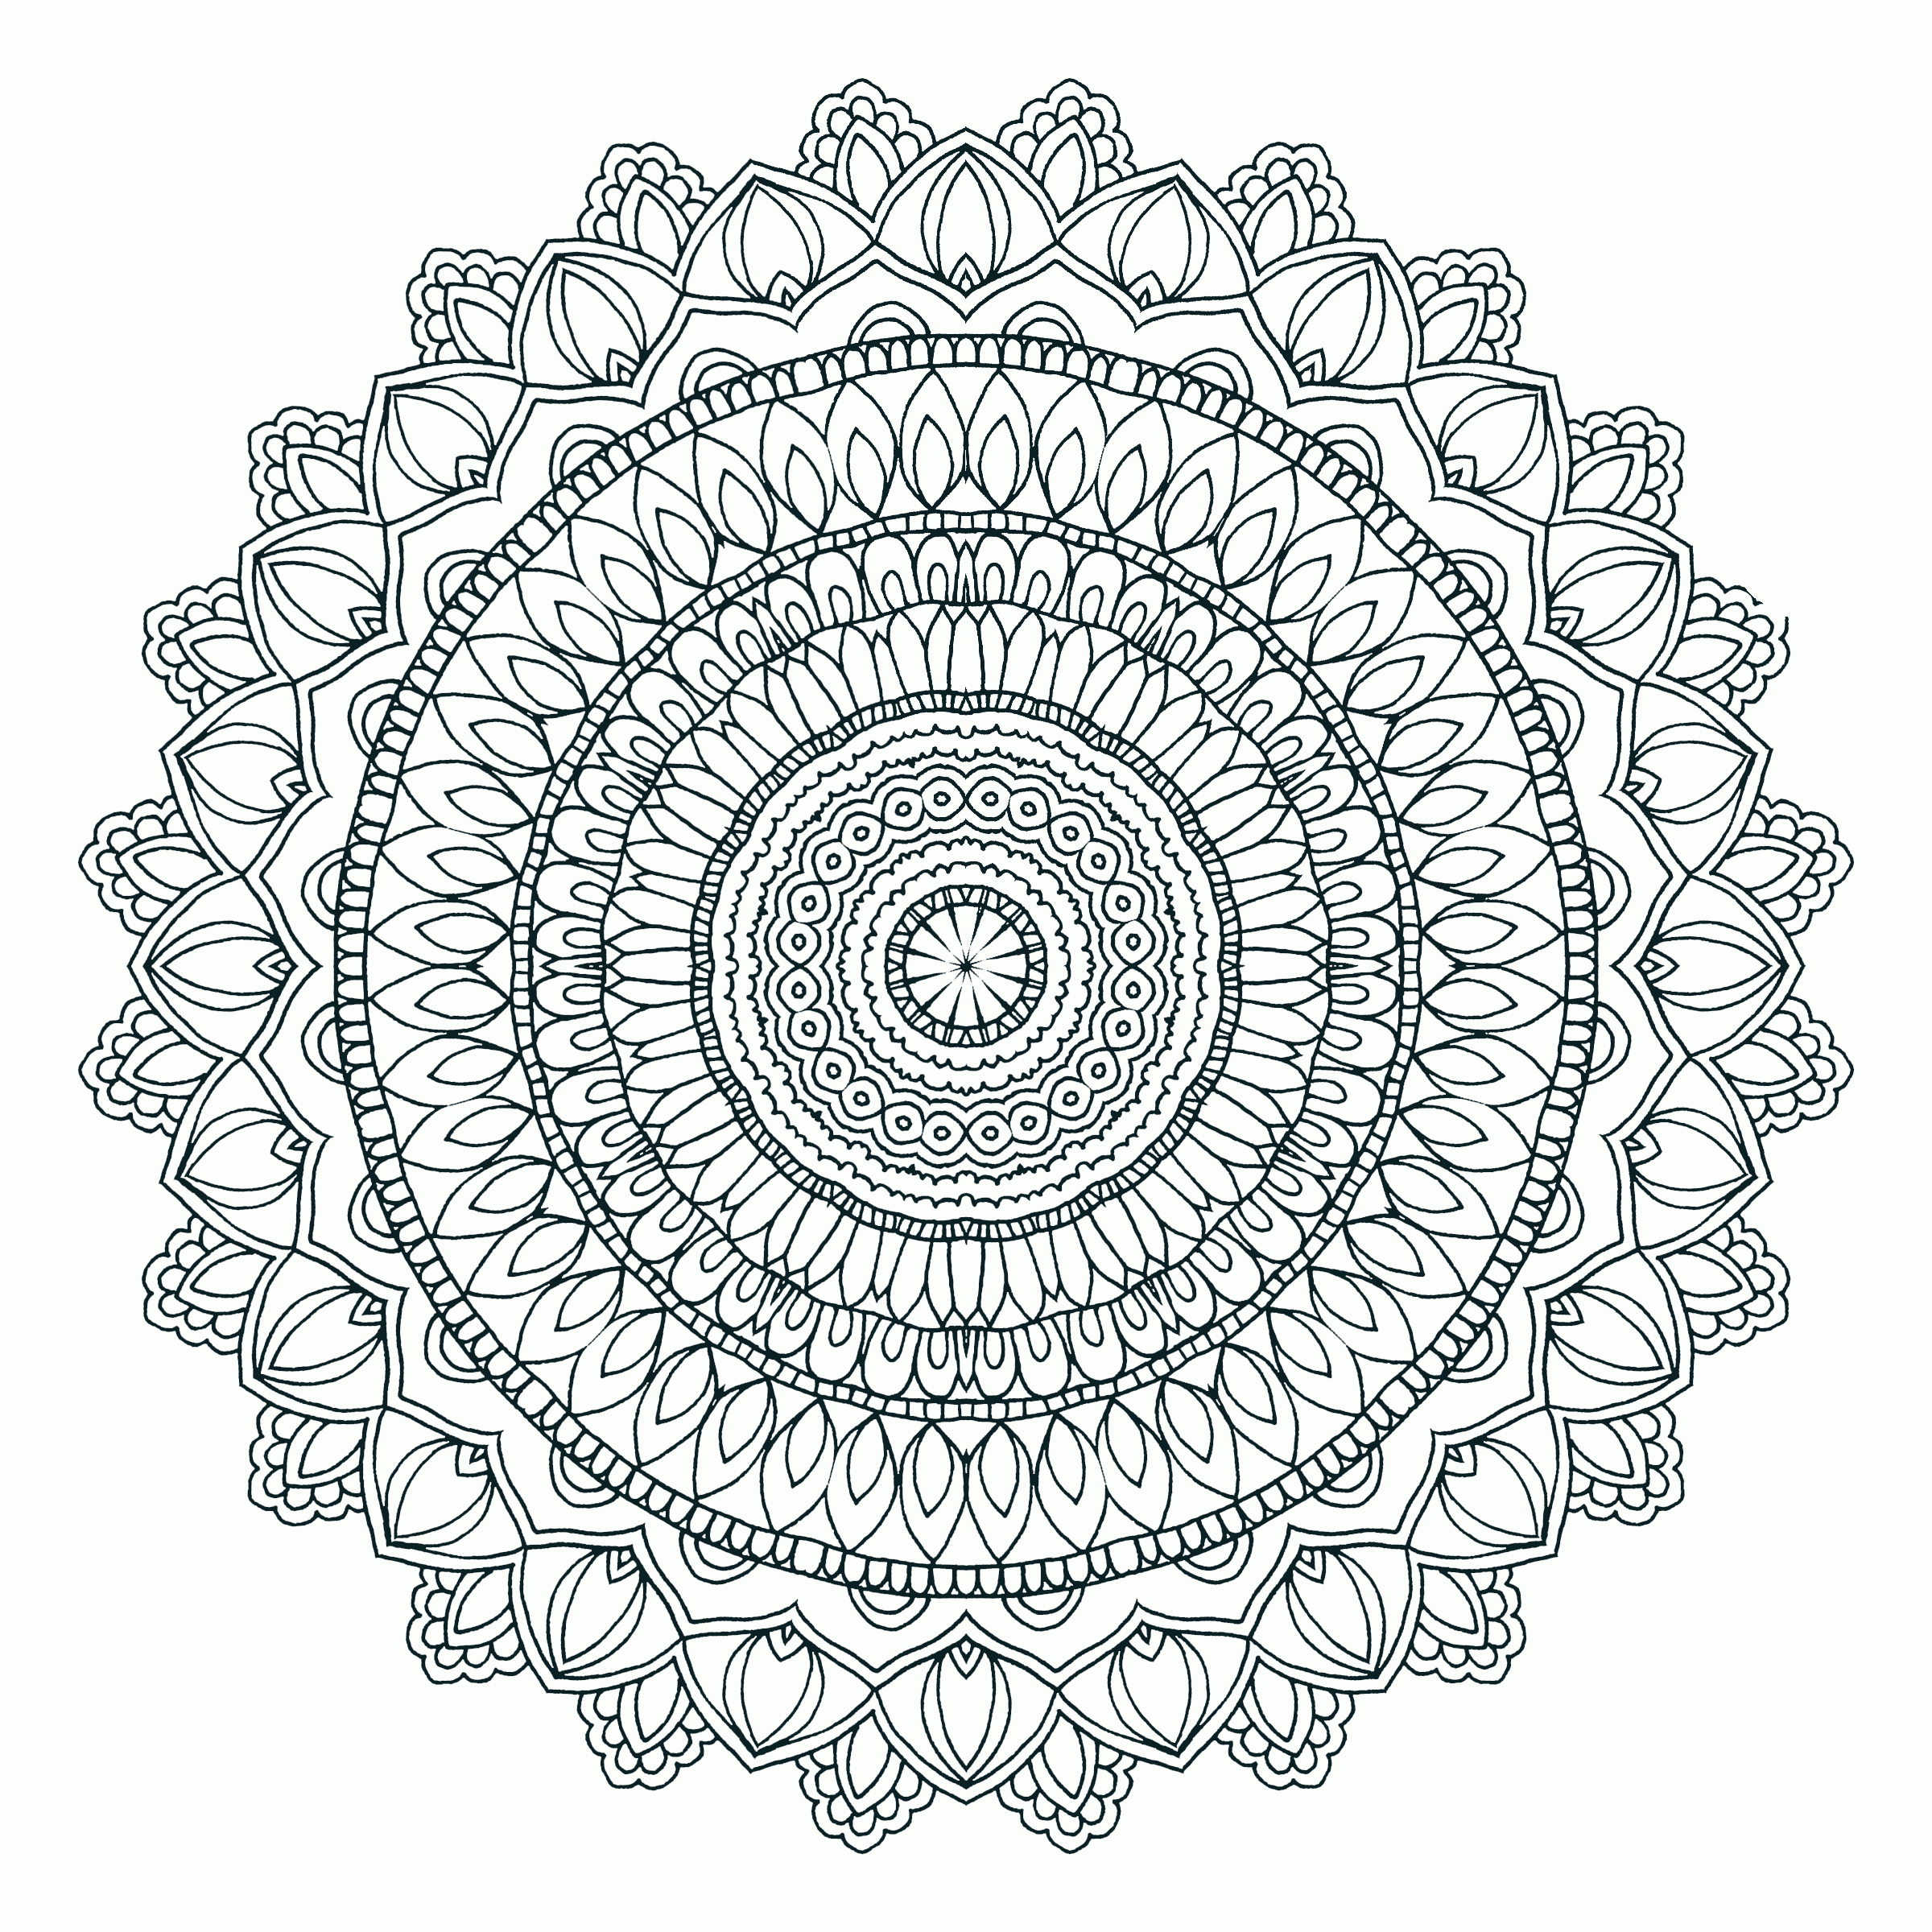 Free Intricate Coloring Pages Mandala 4 |Free coloring on Clipart Library